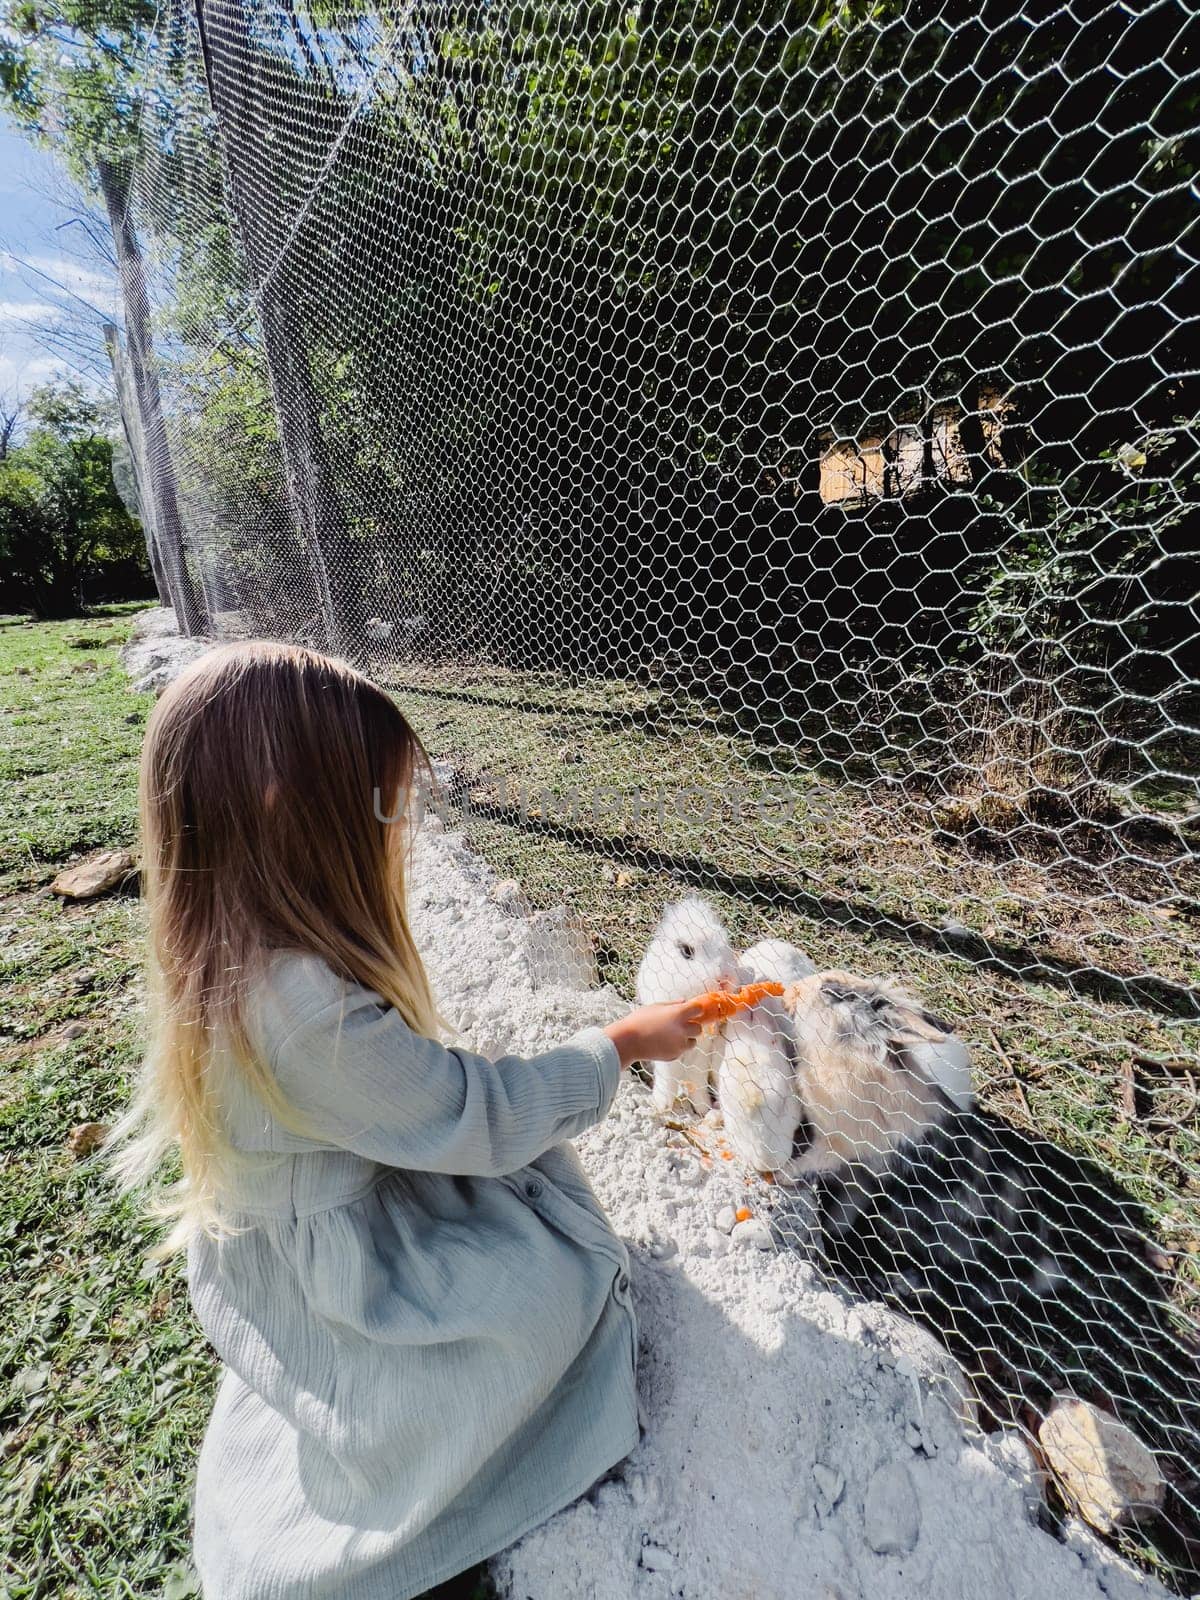 Little girl pushing a carrot to white rabbits through a net on a farm. High quality photo